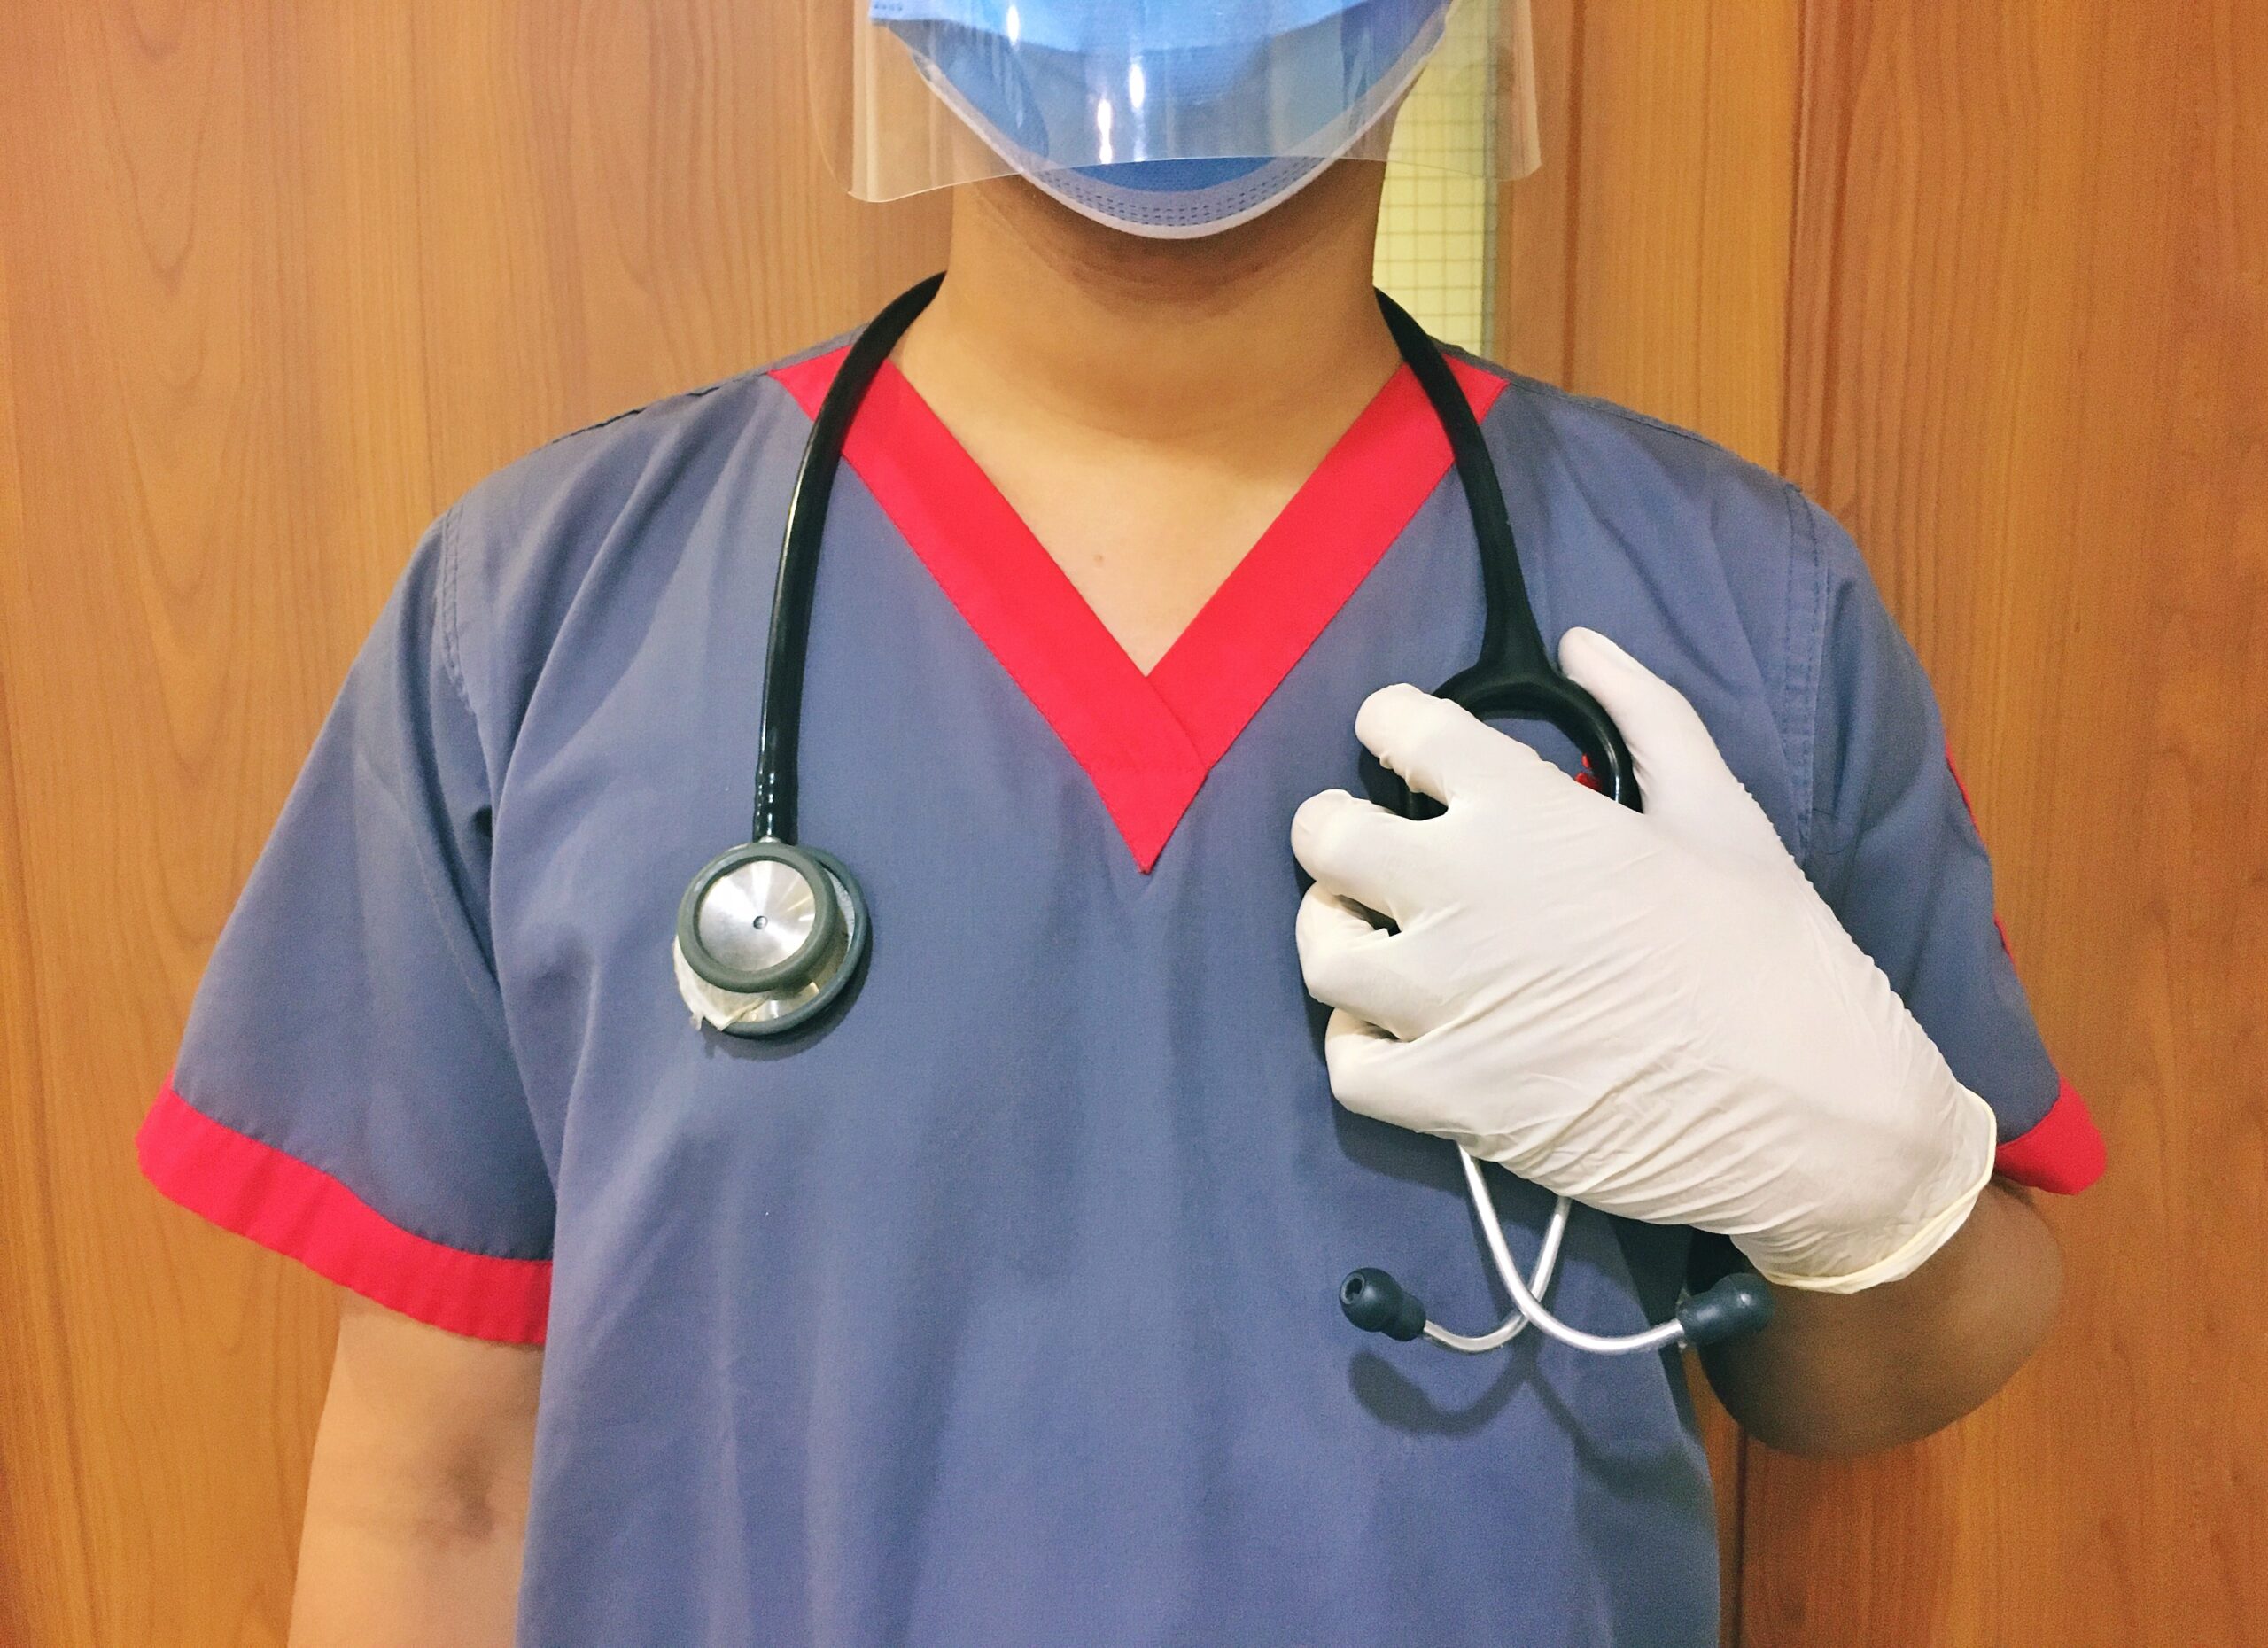 doctor with mask and stethoscope